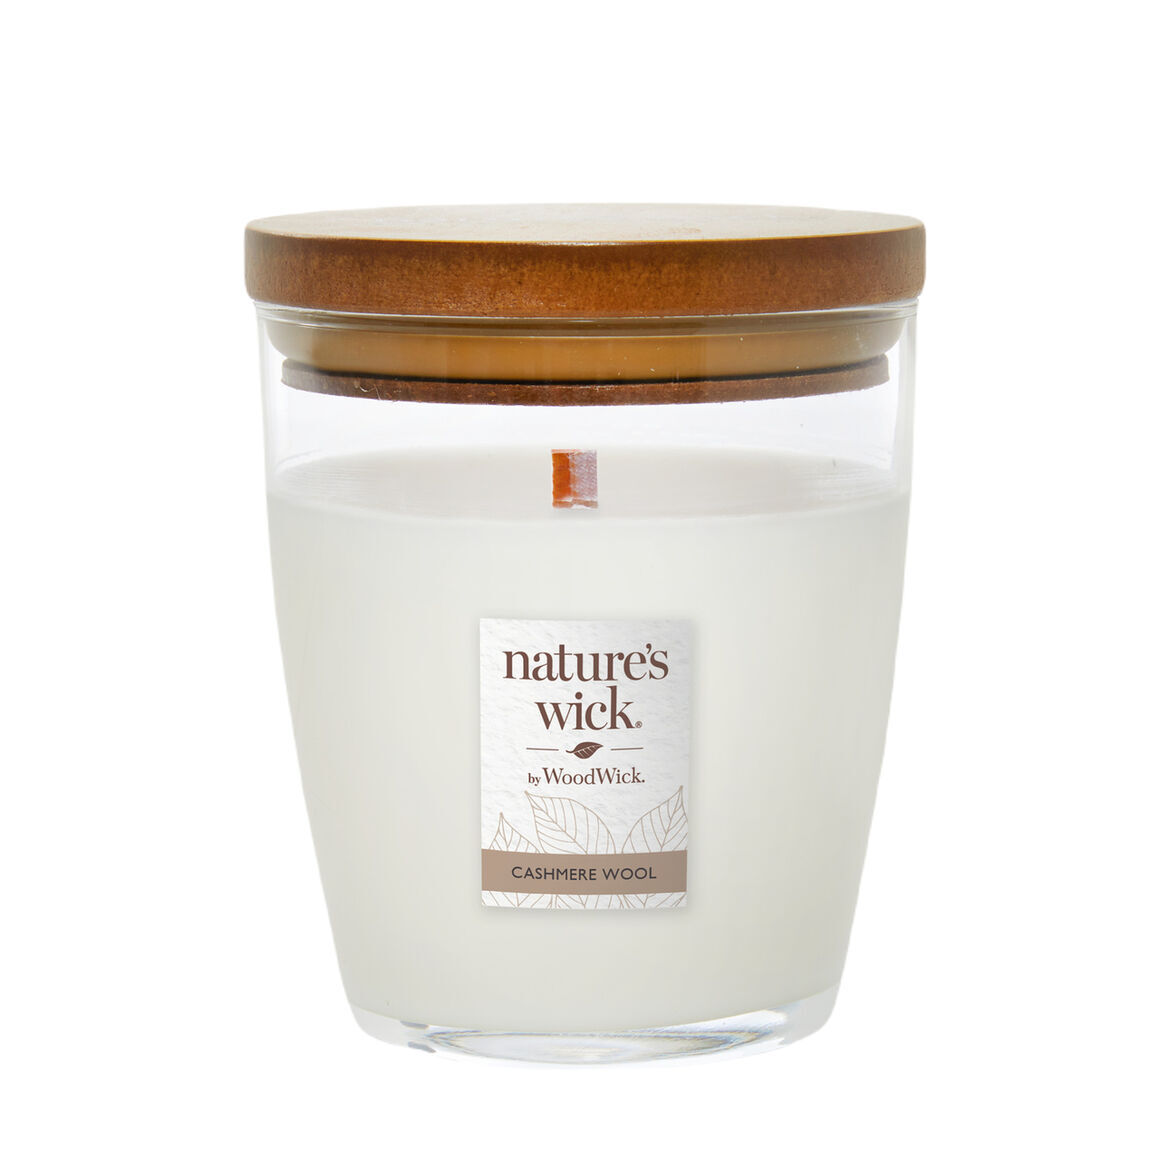 Nature's Wick By WoodWick Cashmere Wool ароматическая свеча Cashmere Wool, 284 г ароматическая свеча woodwick cahmere wool 1 шт